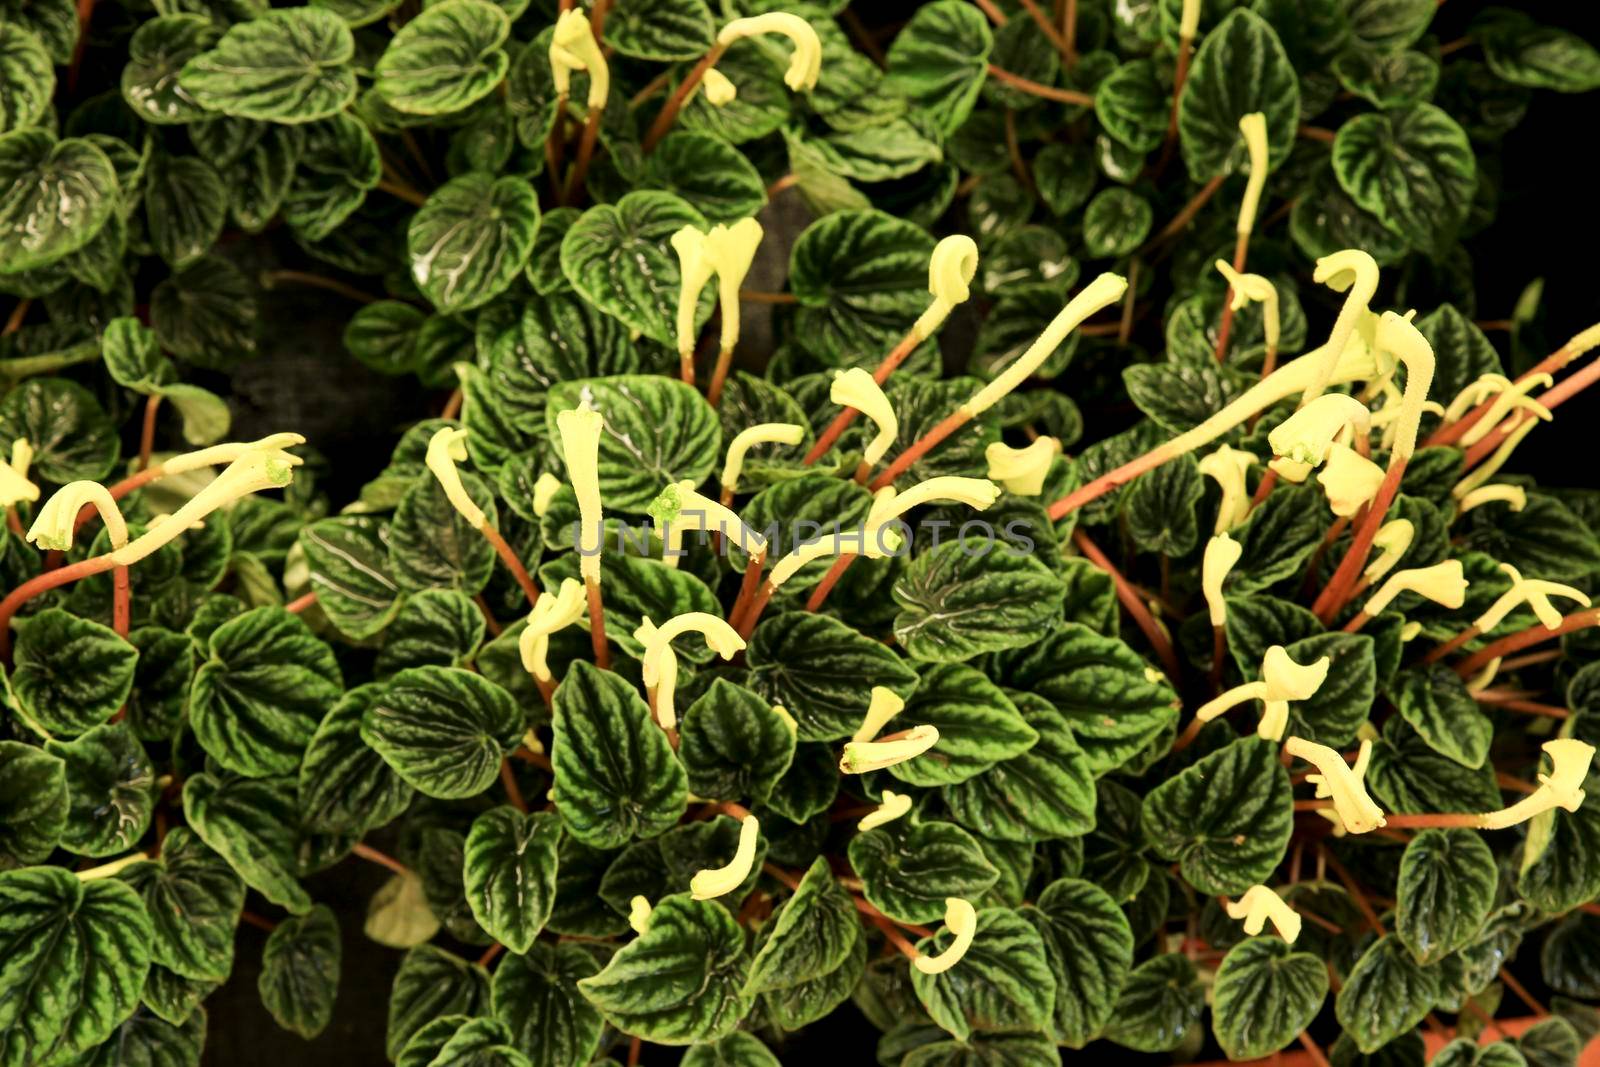 Colorful Peperomia Caperata plants in the garden by soniabonet